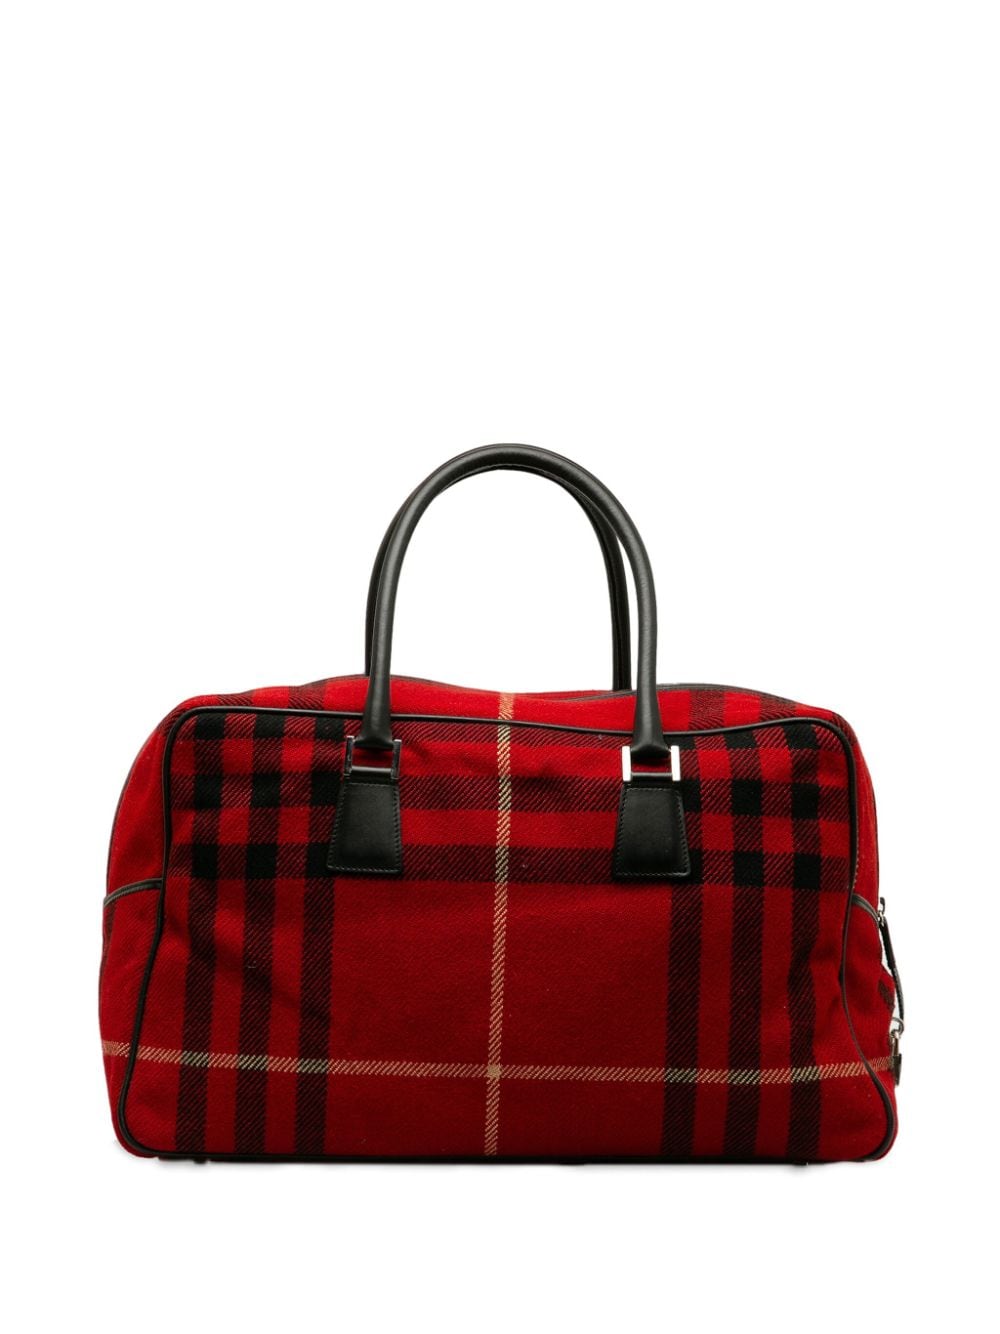 Pre-owned Burberry 经典格纹旅行包（2000-2017年典藏款） In Red